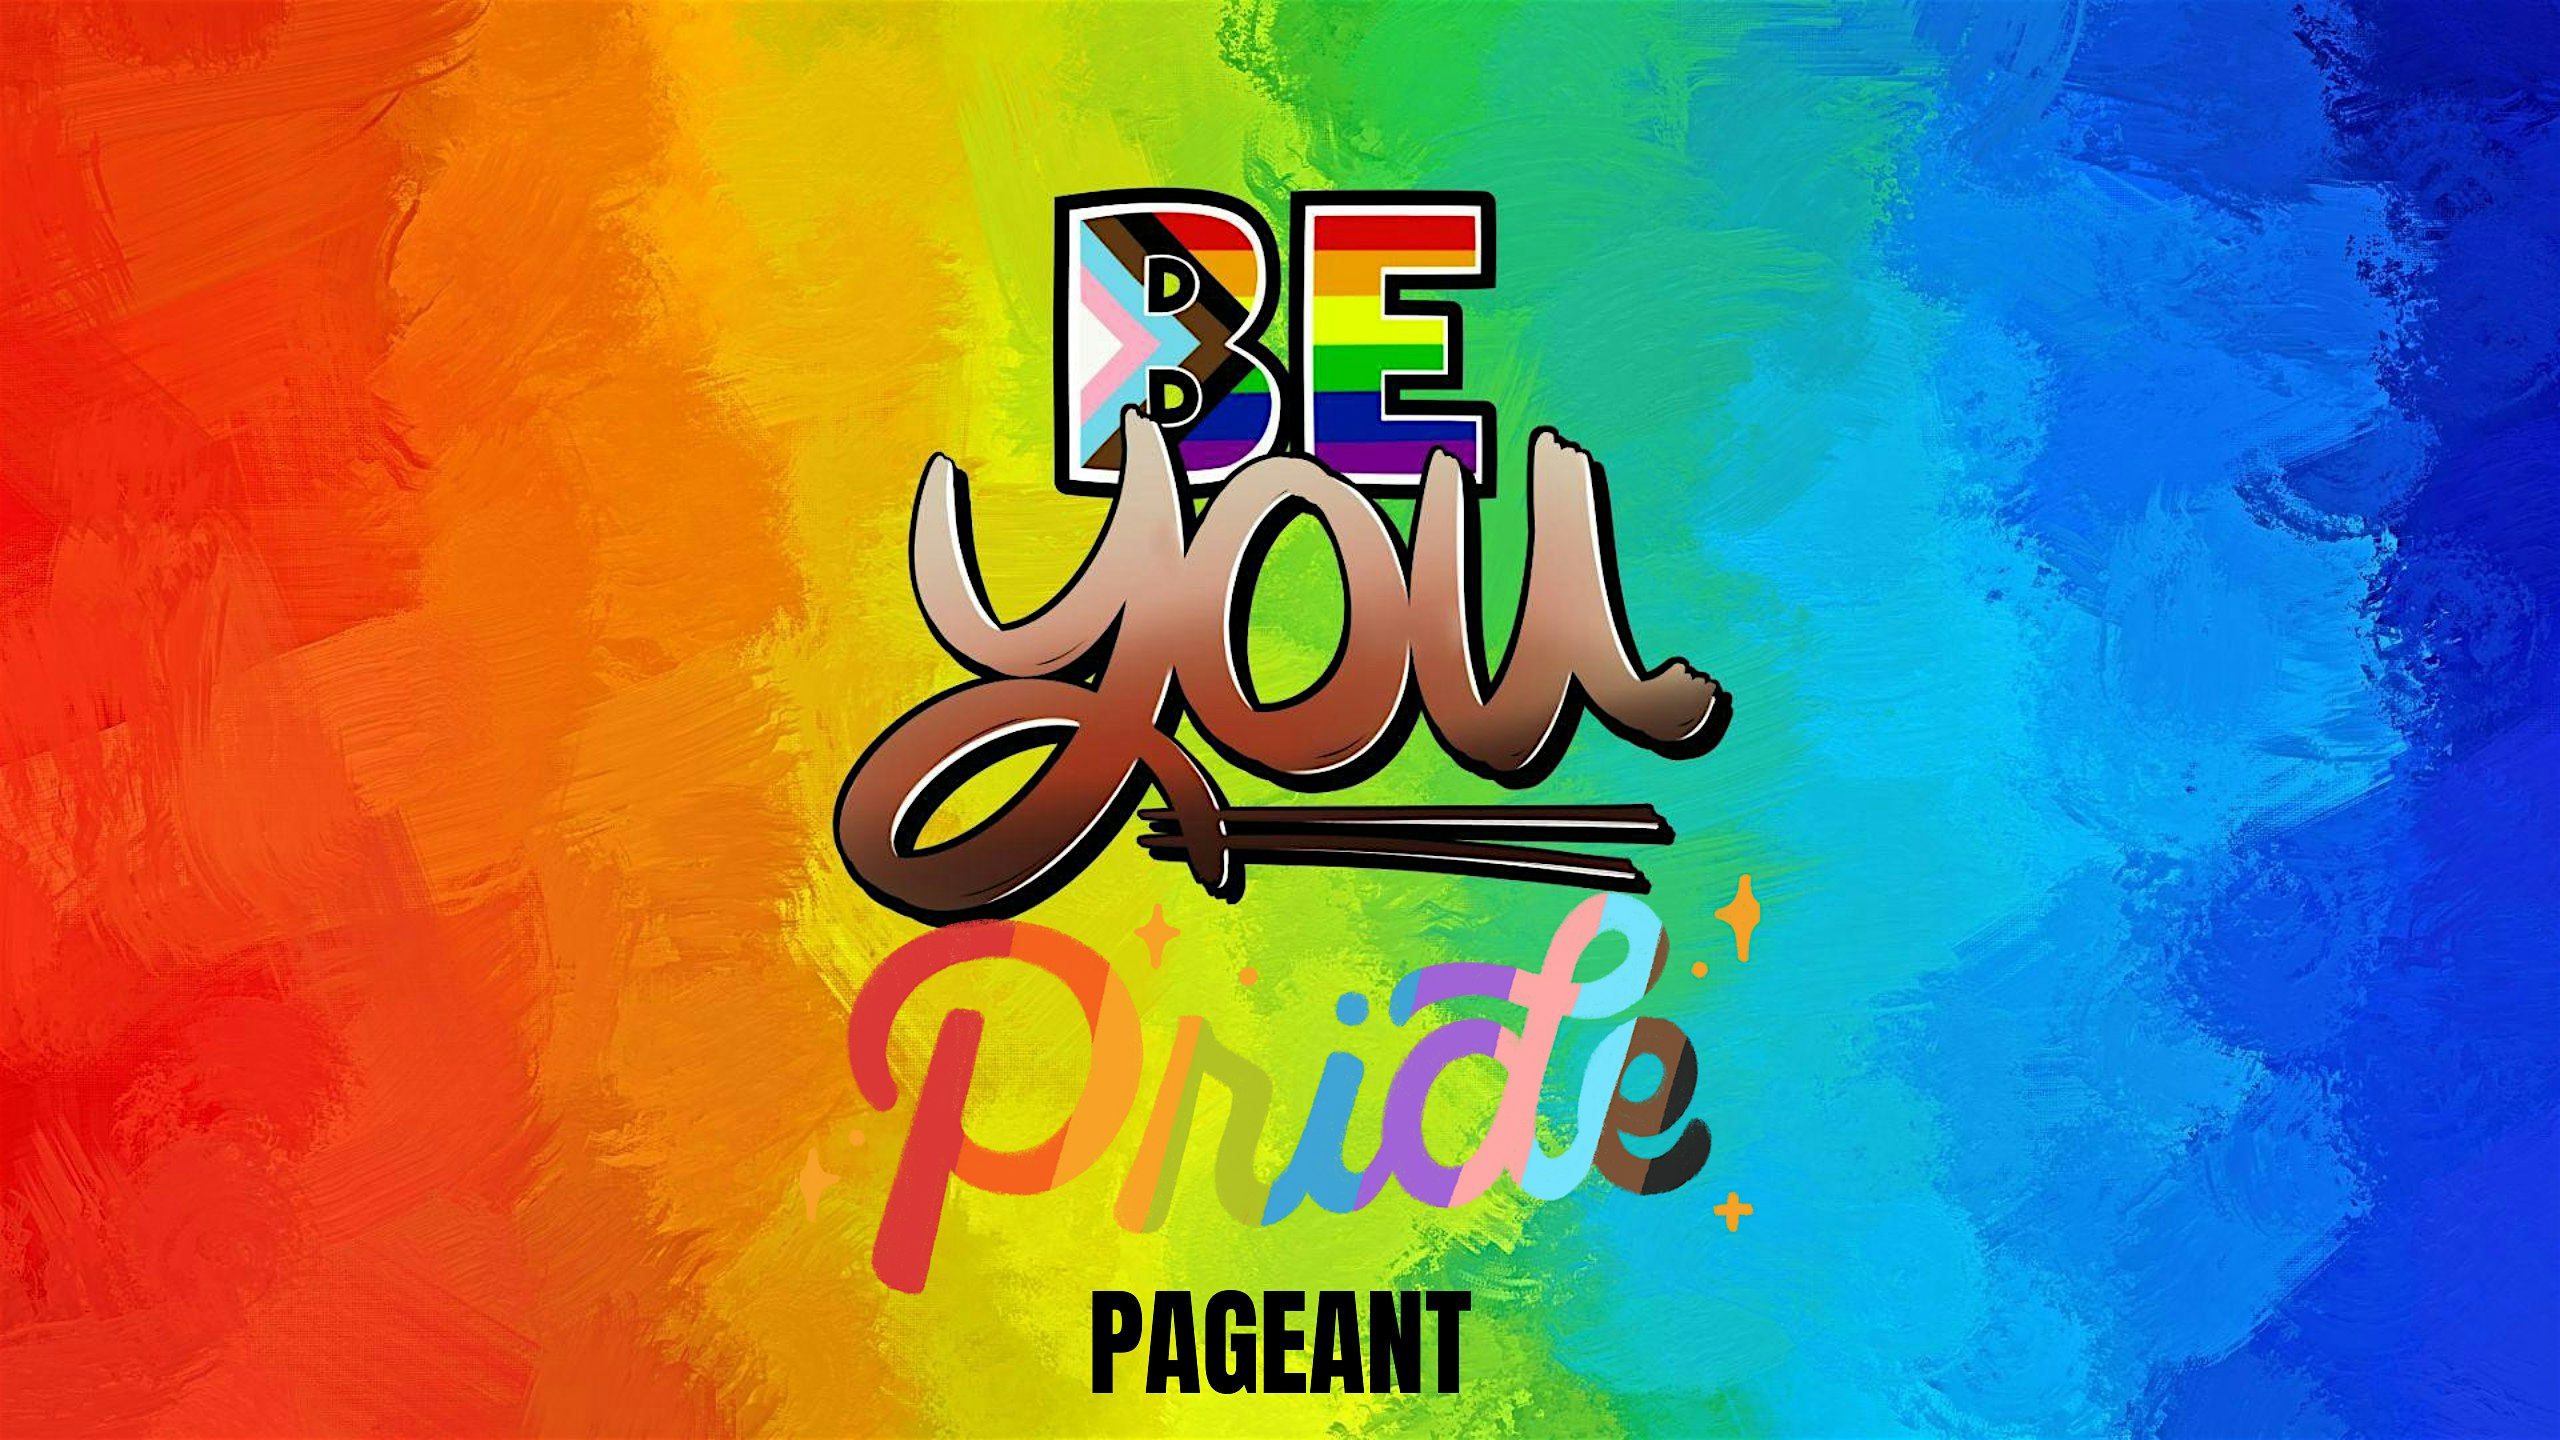 Philly Pride 365 "BE YOU" Pageant